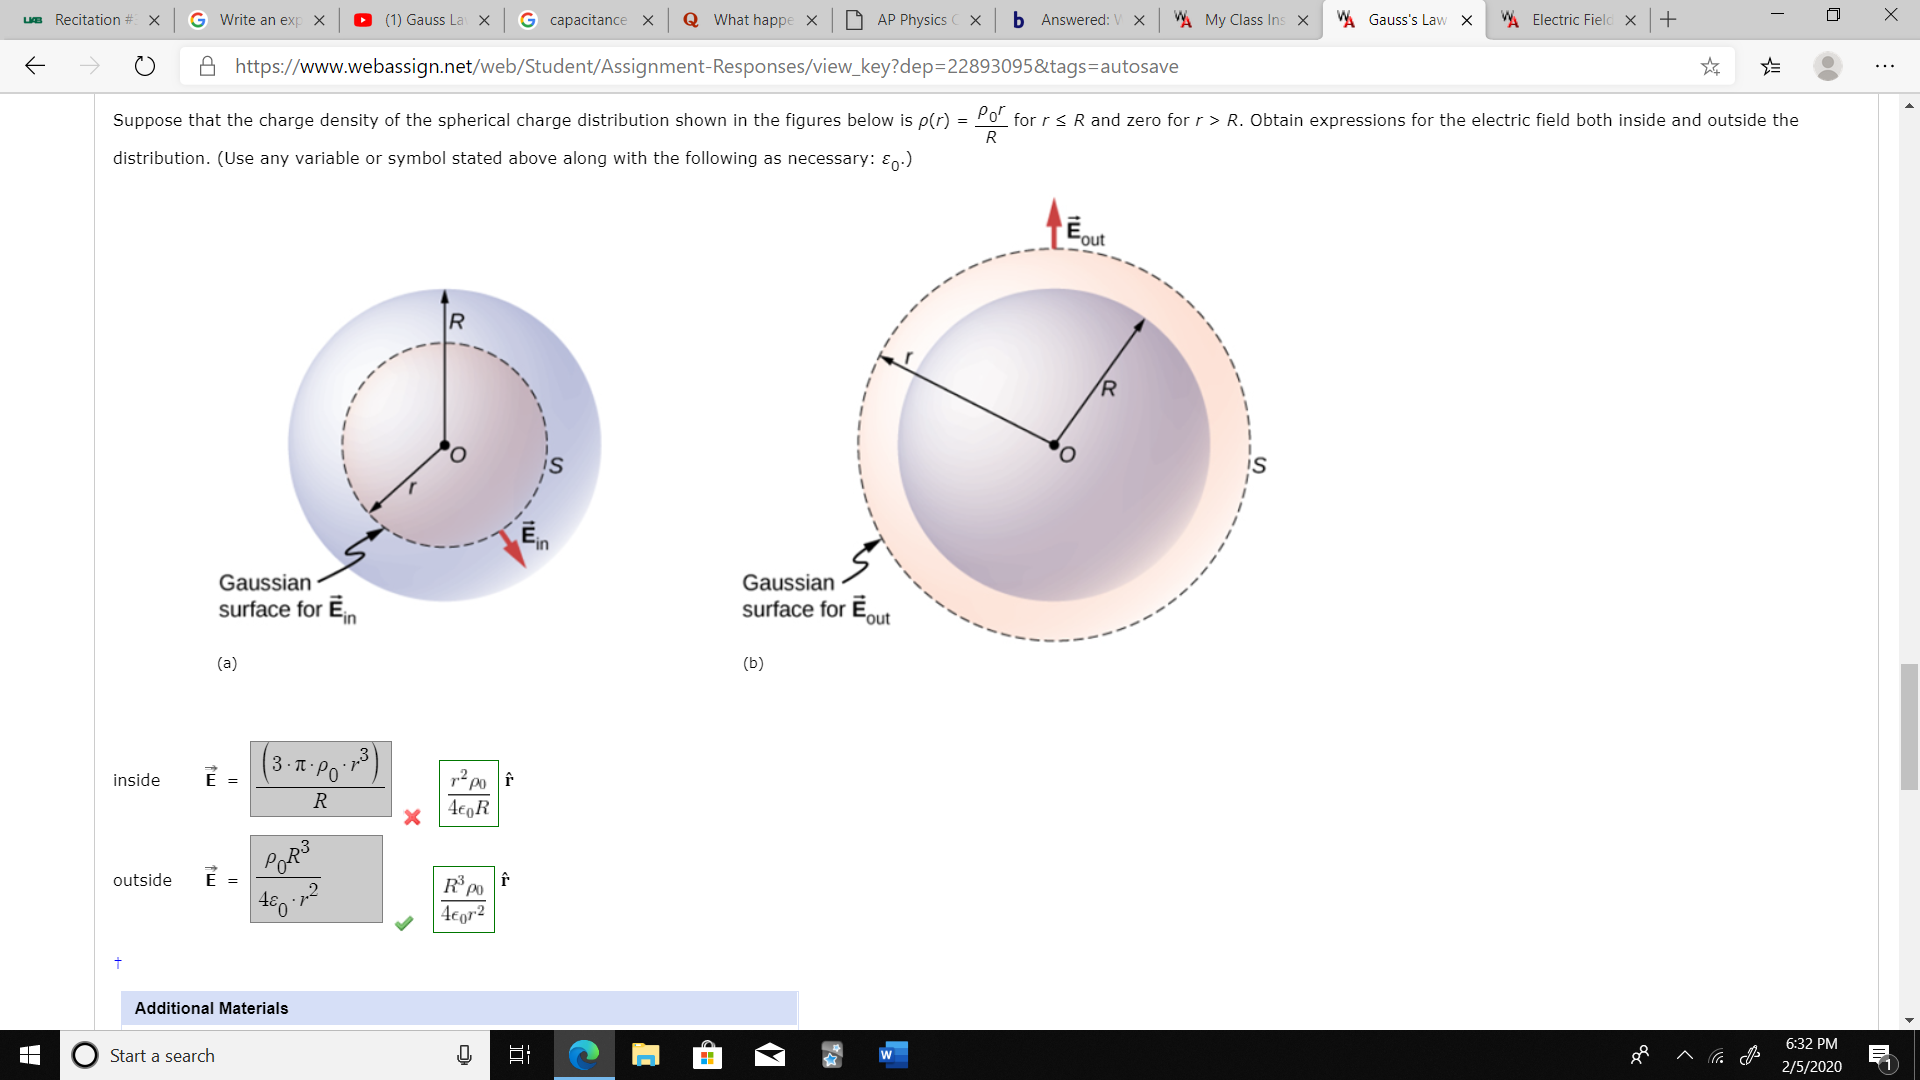 W Electric Field X
W Gauss's Law X
WA My Class Ins X
b Answered: V X
D AP Physics
What happe X
G capacitance X
(1) Gauss La X
G Write an exp
UB Recitation # X
A https://www.webassign.net/web/Student/Assignment-Responses/view_key?dep=D22893095&tags=autosave
Por
for r < R and zero for r> R. Obtain expressions for the electric field both inside and outside the
Suppose that the charge density of the spherical charge distribution shown in the figures below is p(r)
distribution. (Use any variable or symbol stated above along with the following as necessary: En:)
Eout
R.
Fin
Gaussian
surface for Eout
Gaussian
surface for Ein
(b)
(a)
(3.x·P'"
inside
4€0R
outside
460
4€gr2
6:32 PM
Additional Materials
2/5/2020
Start a search
